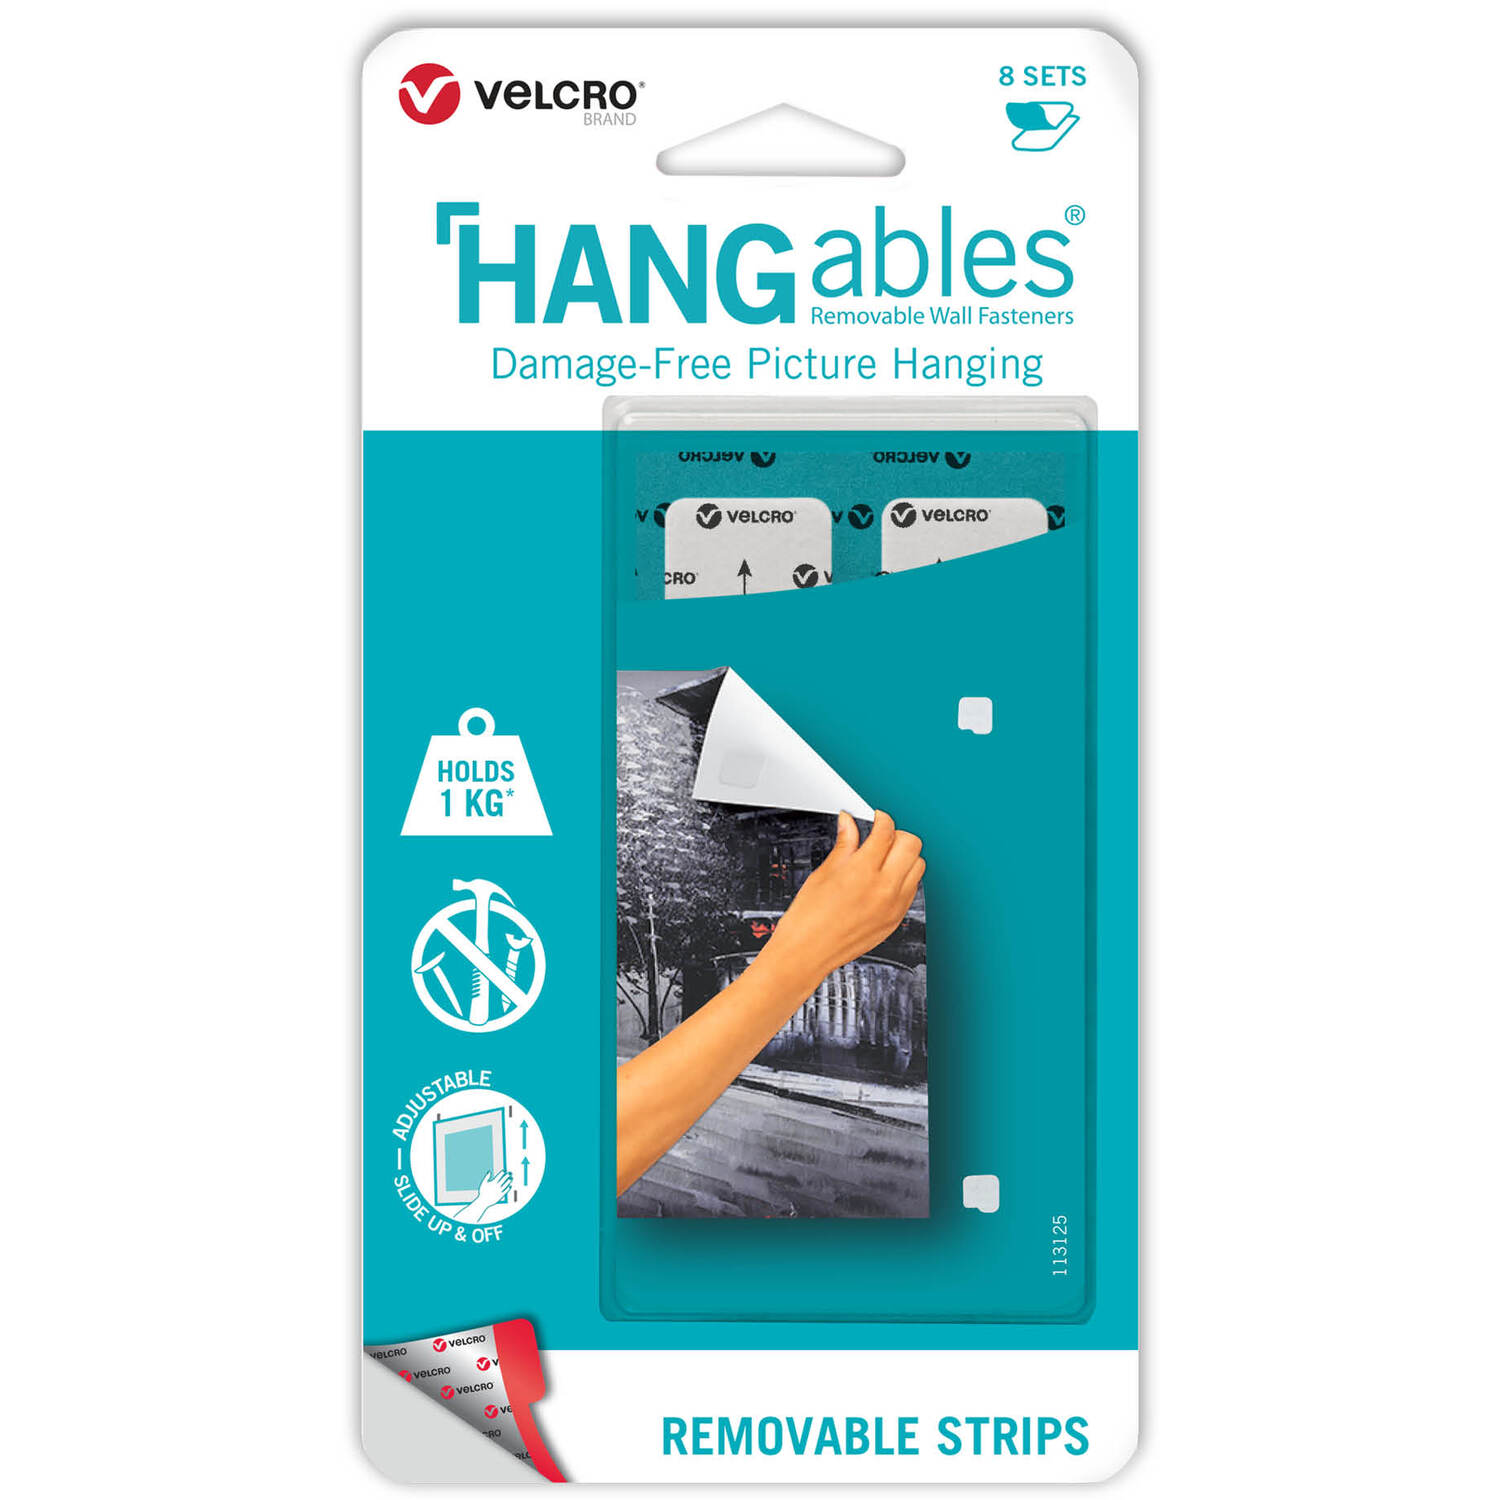 Velcro Hangables Wall Fasteners Square Adhesive Strips Set of 8 Image 1